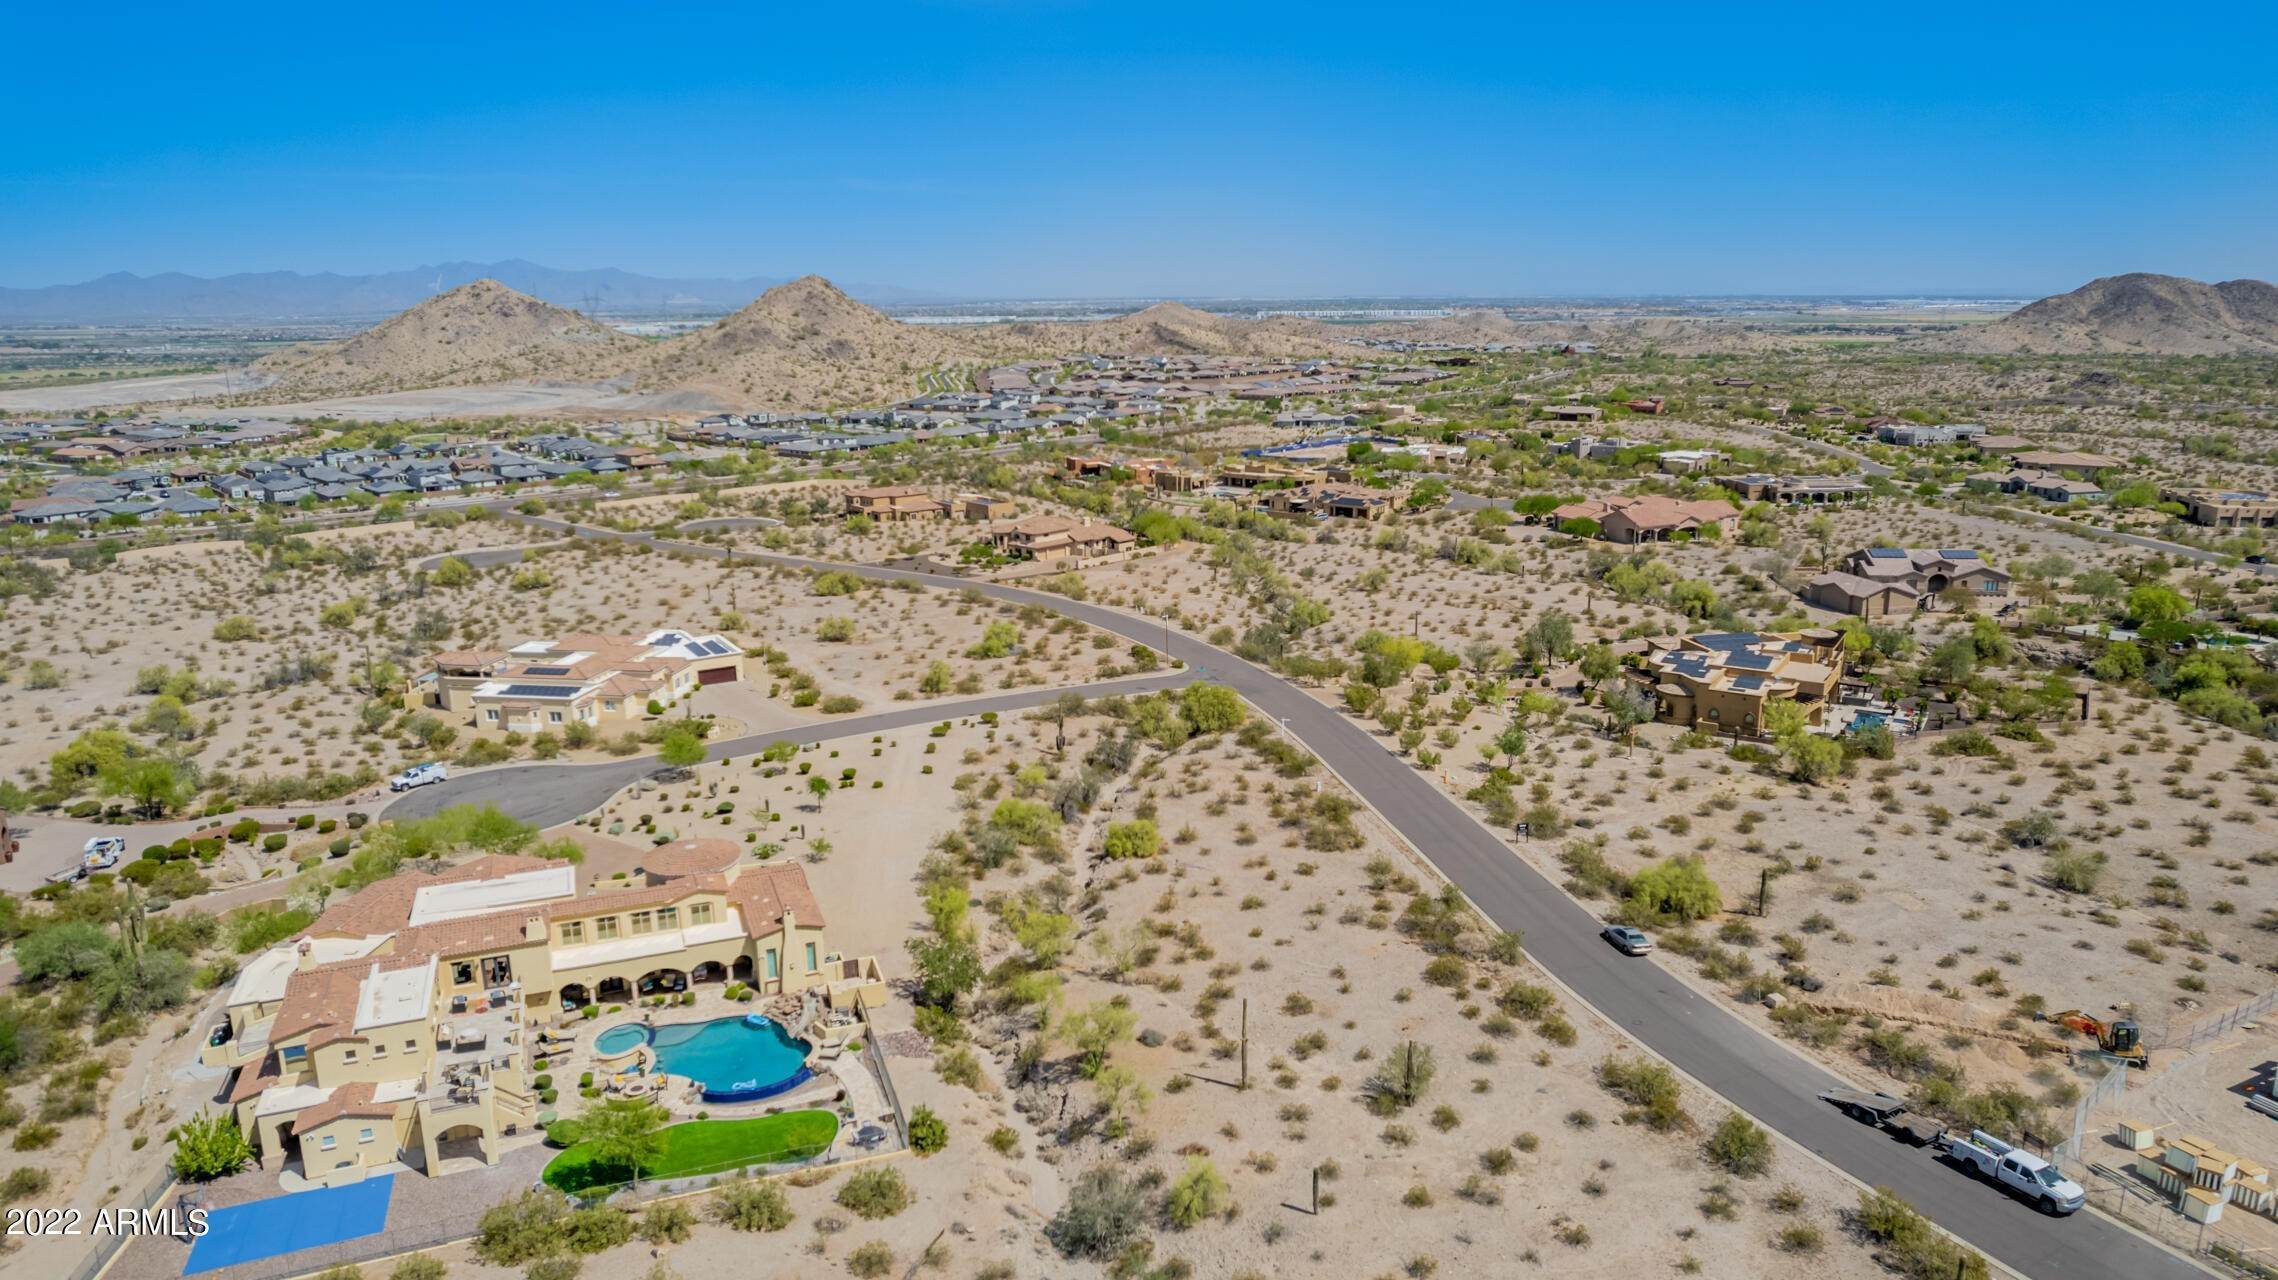 4. Land for Sale at Goodyear, AZ 85338